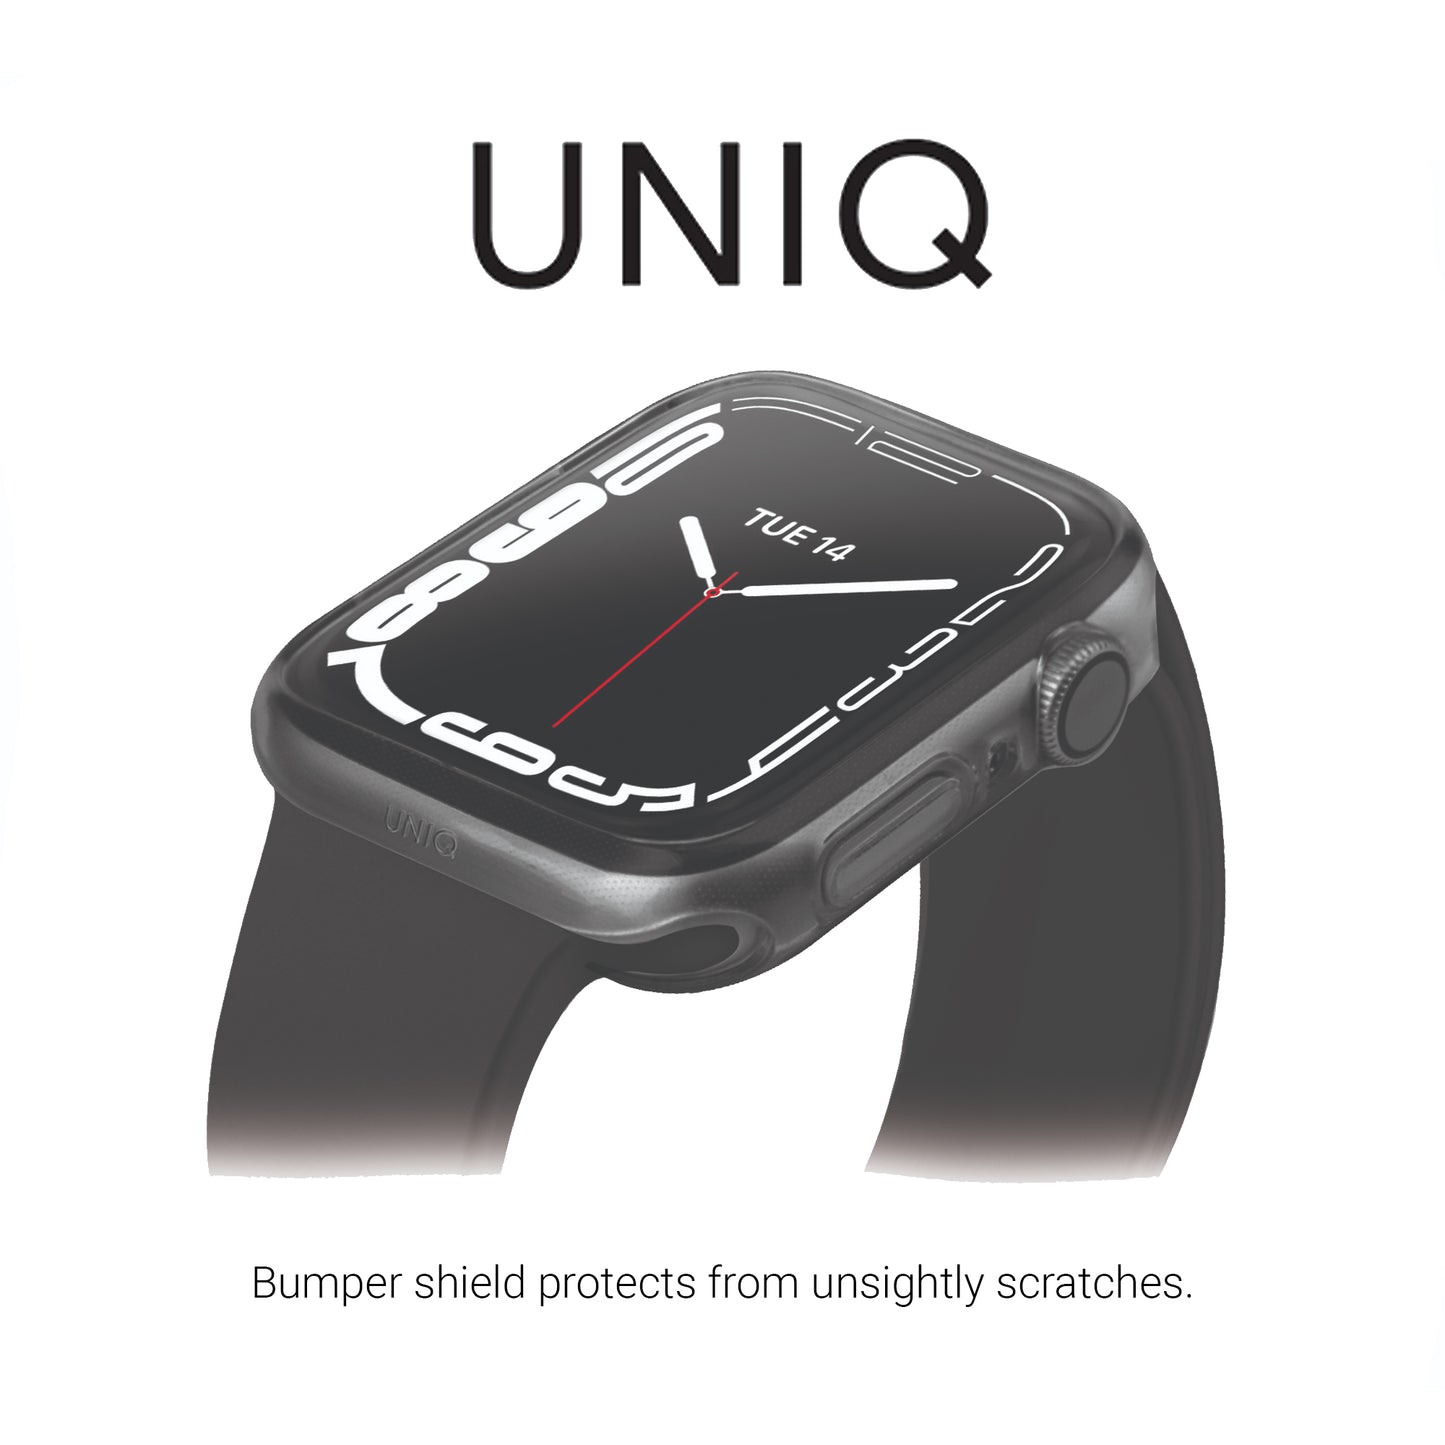 UNIQ Glase Dual Pack Case for Apple Watch Series 7 2021 ( 41mm ) - 2pcs Case -  Clear & Smoke (Barcode: 8886463679340 )